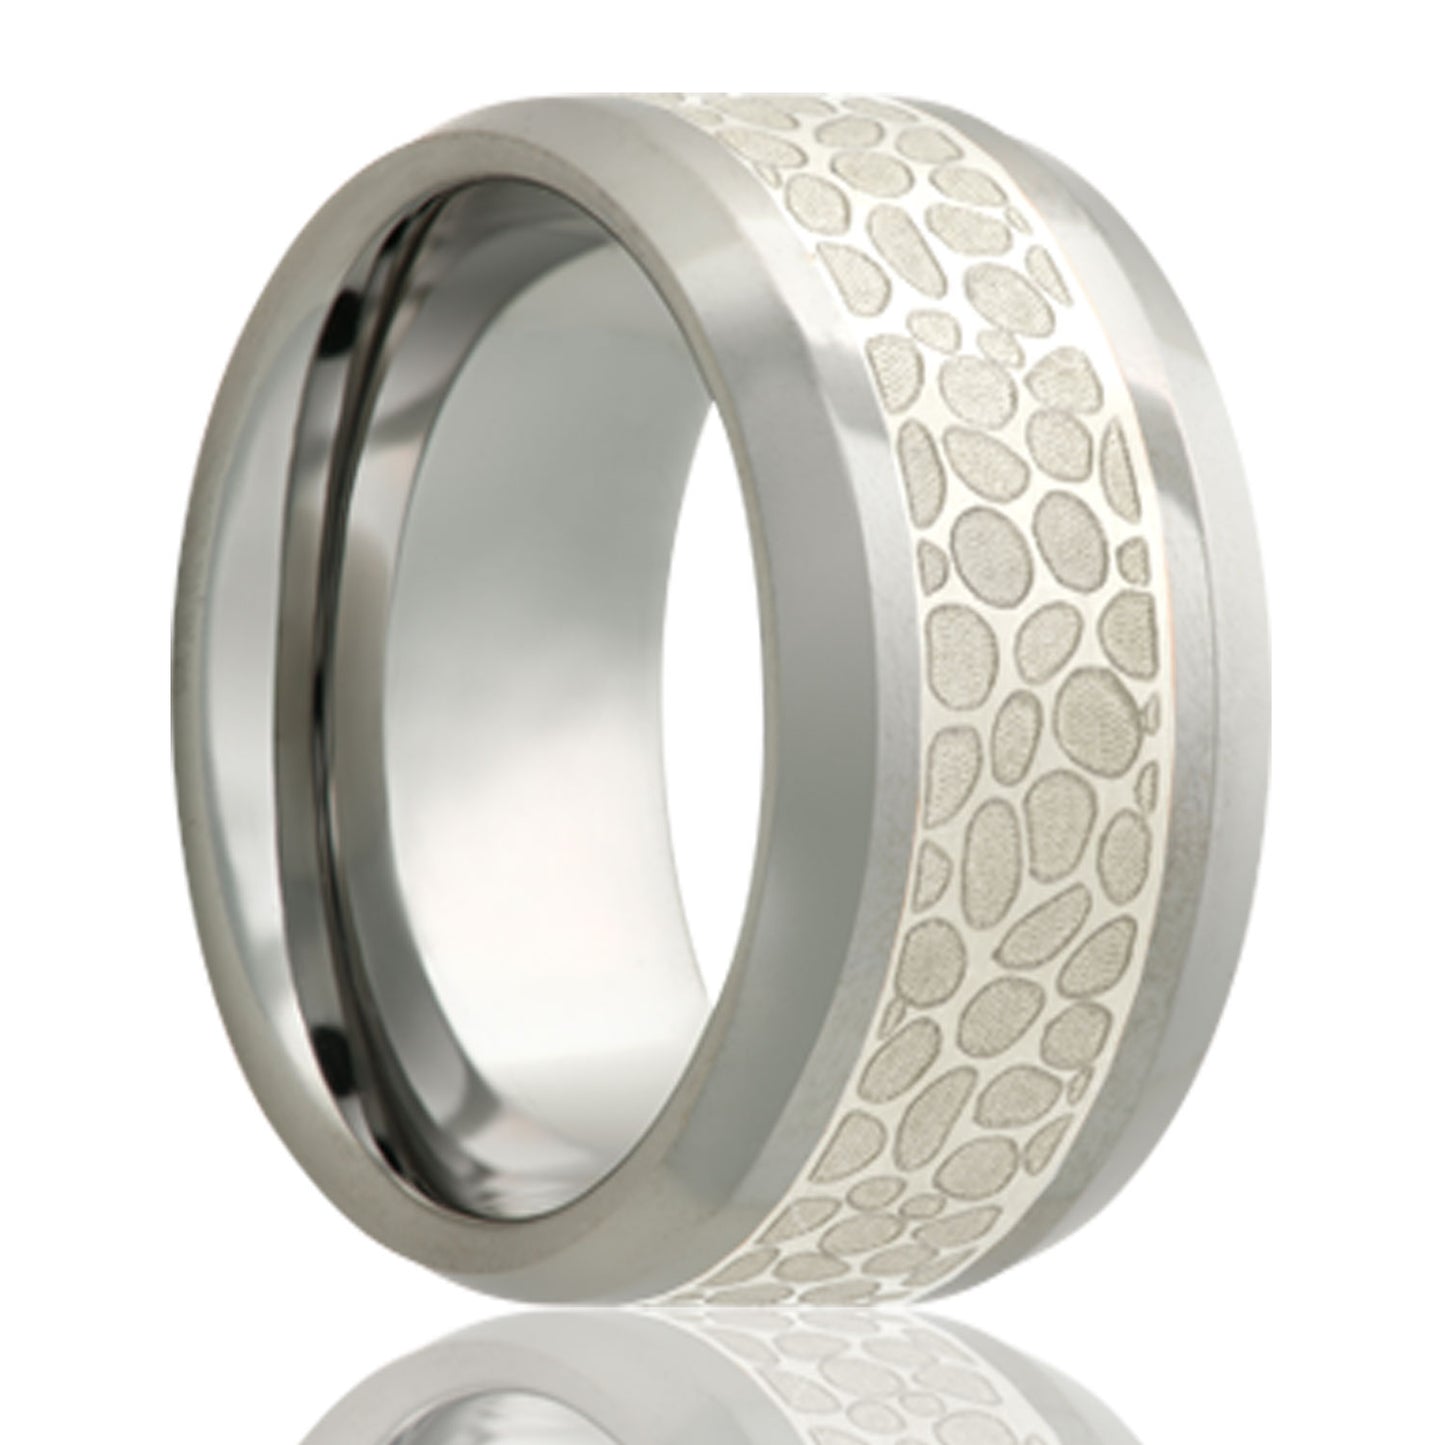 A hammered silver inlay tungsten men's wedding band with beveled edges displayed on a neutral white background.